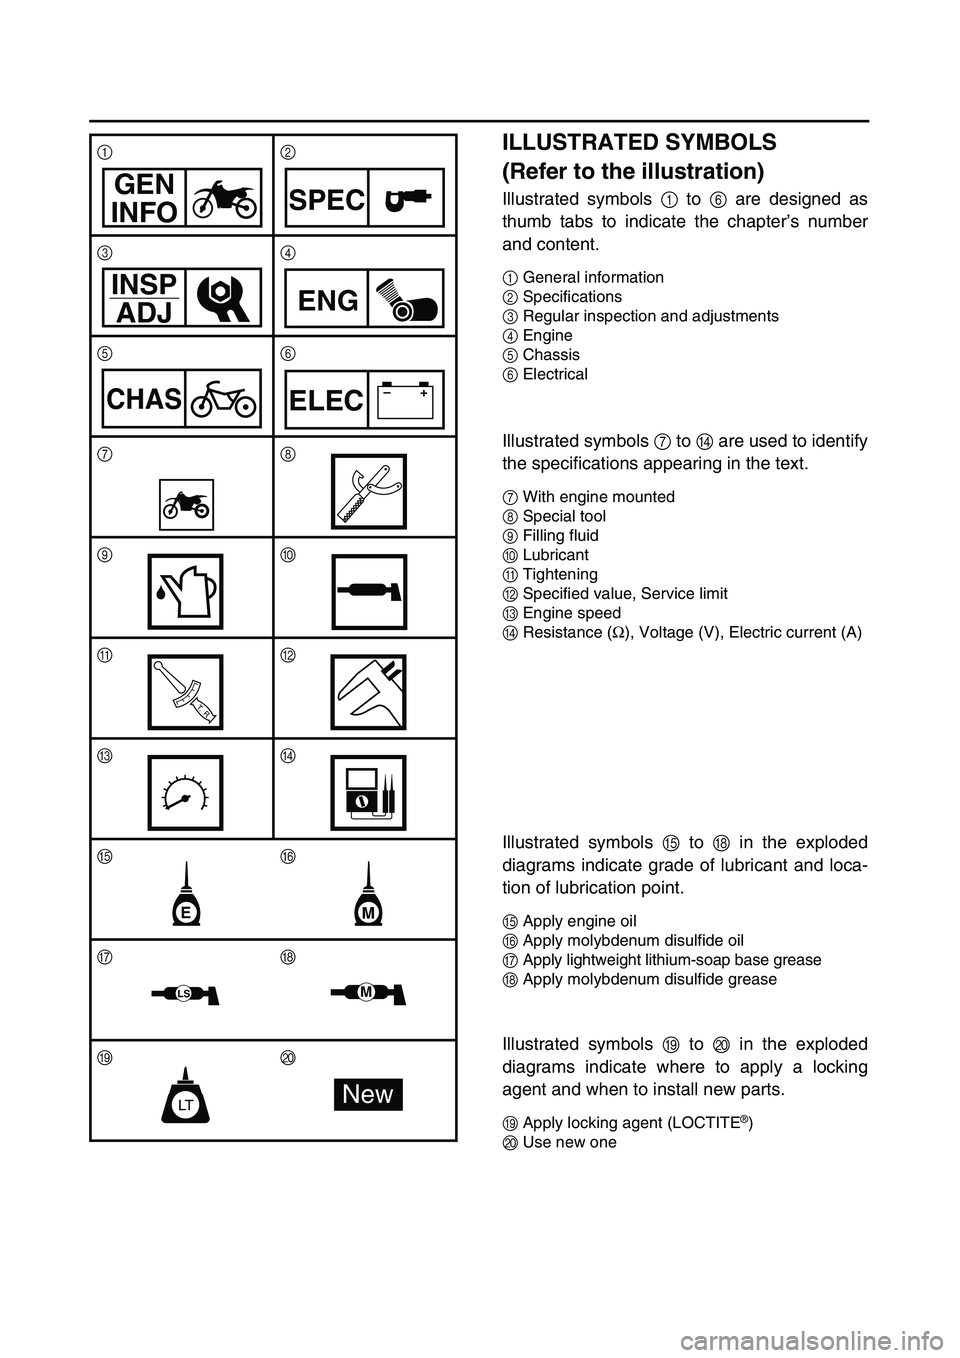 YAMAHA TTR125 2005  Notices Demploi (in French)  
ILLUSTRATED SYMBOLS 
(Refer to the illustration) 
Illustrated symbols  
1  
 to   
6  
 are designed as
thumb tabs to indicate the chapter’s number
and content. 
1 
General information 
2 
Specifi